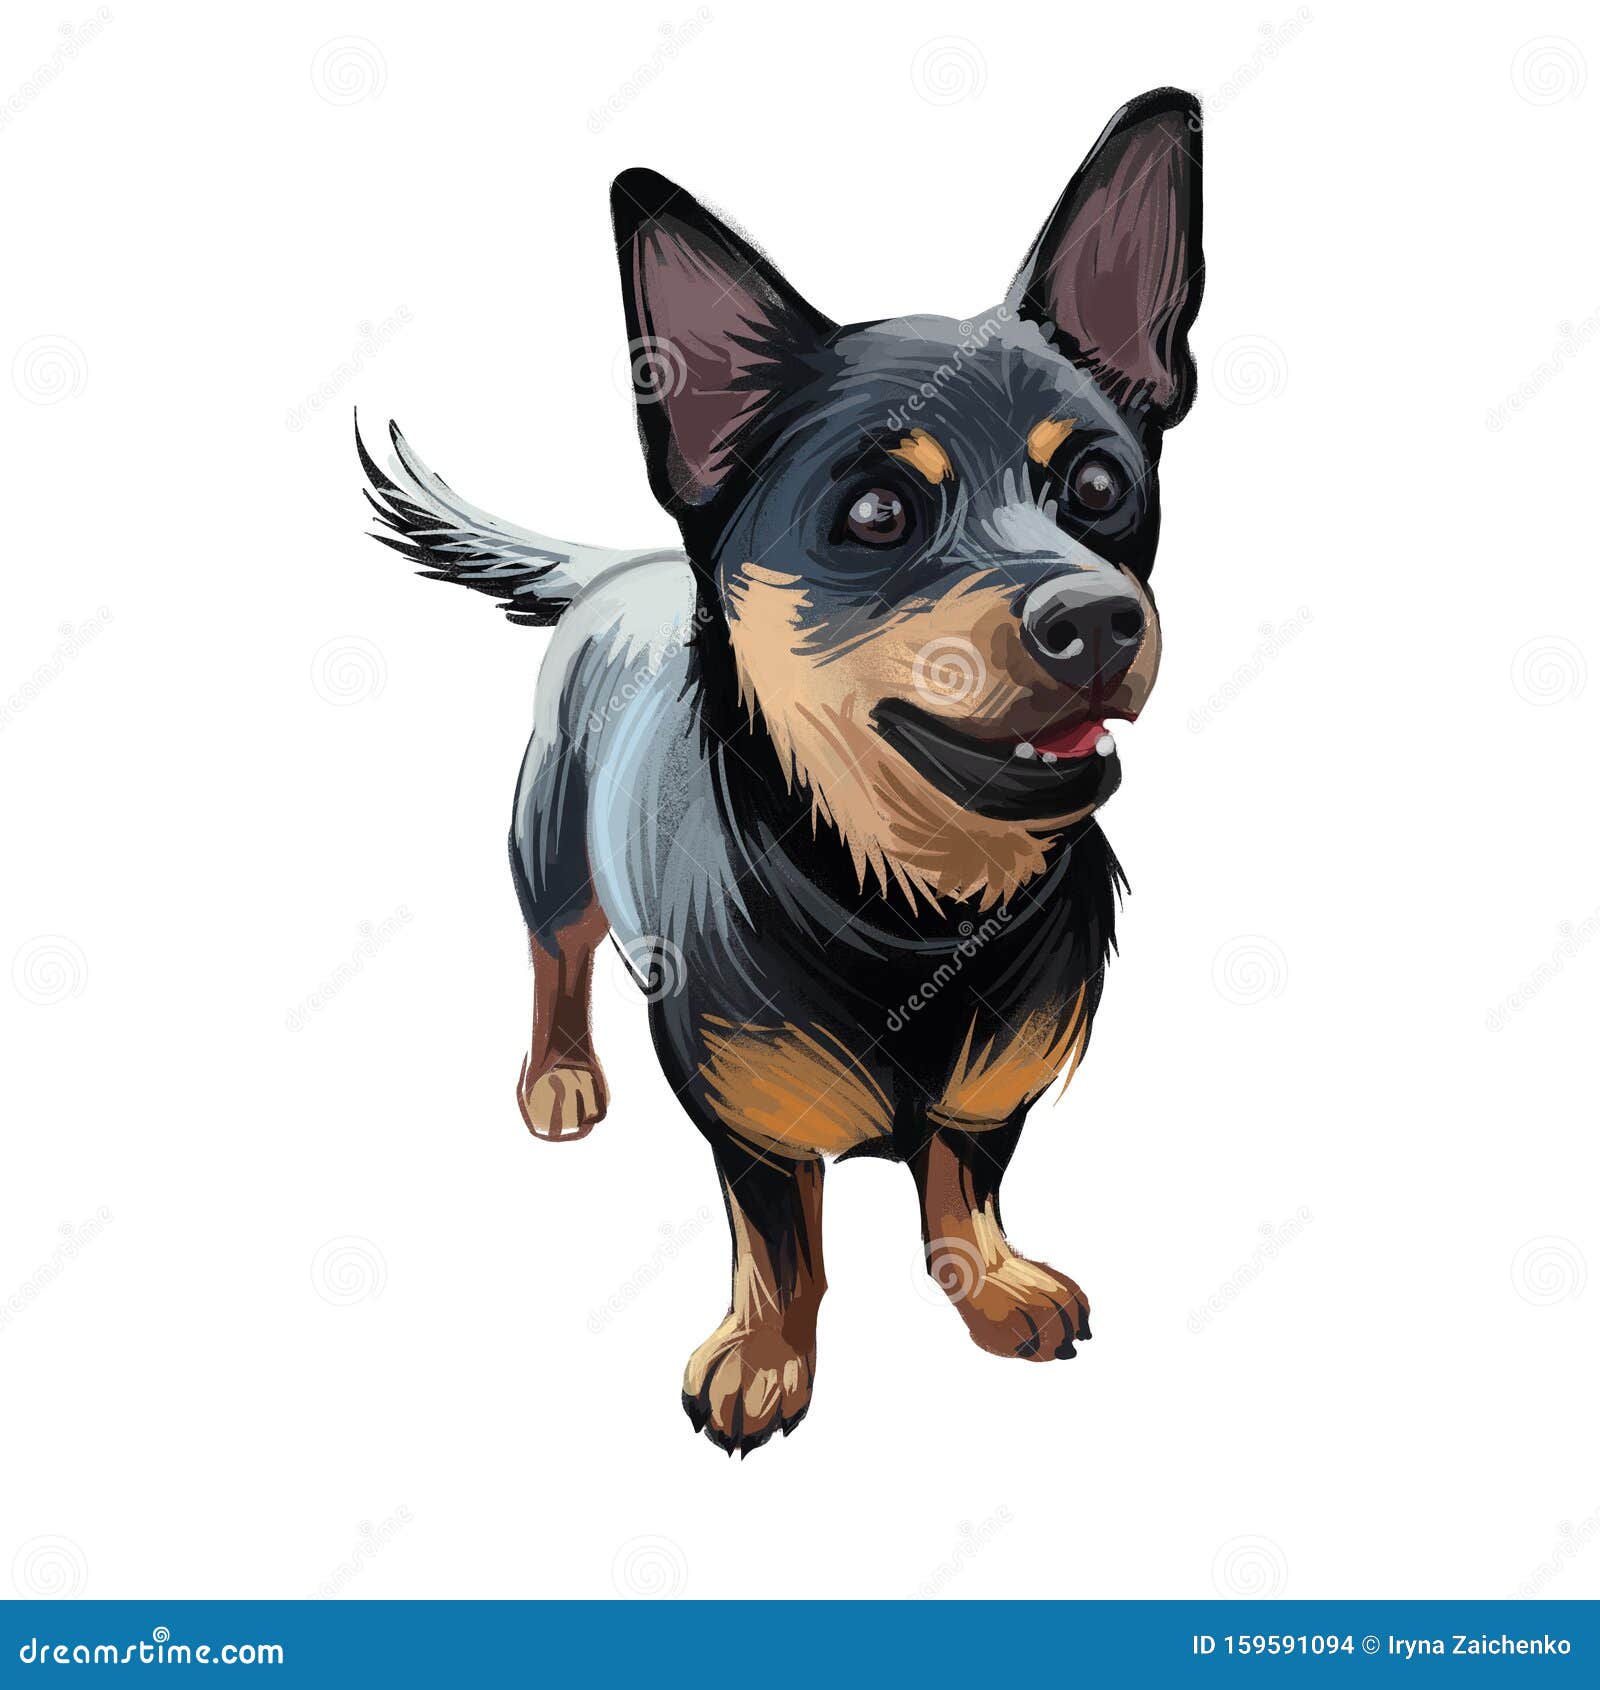 lancashire heeler ormskirk terrier puppy breed digital art. drover and cattle herder, domesticated animal mammal with long muzzle